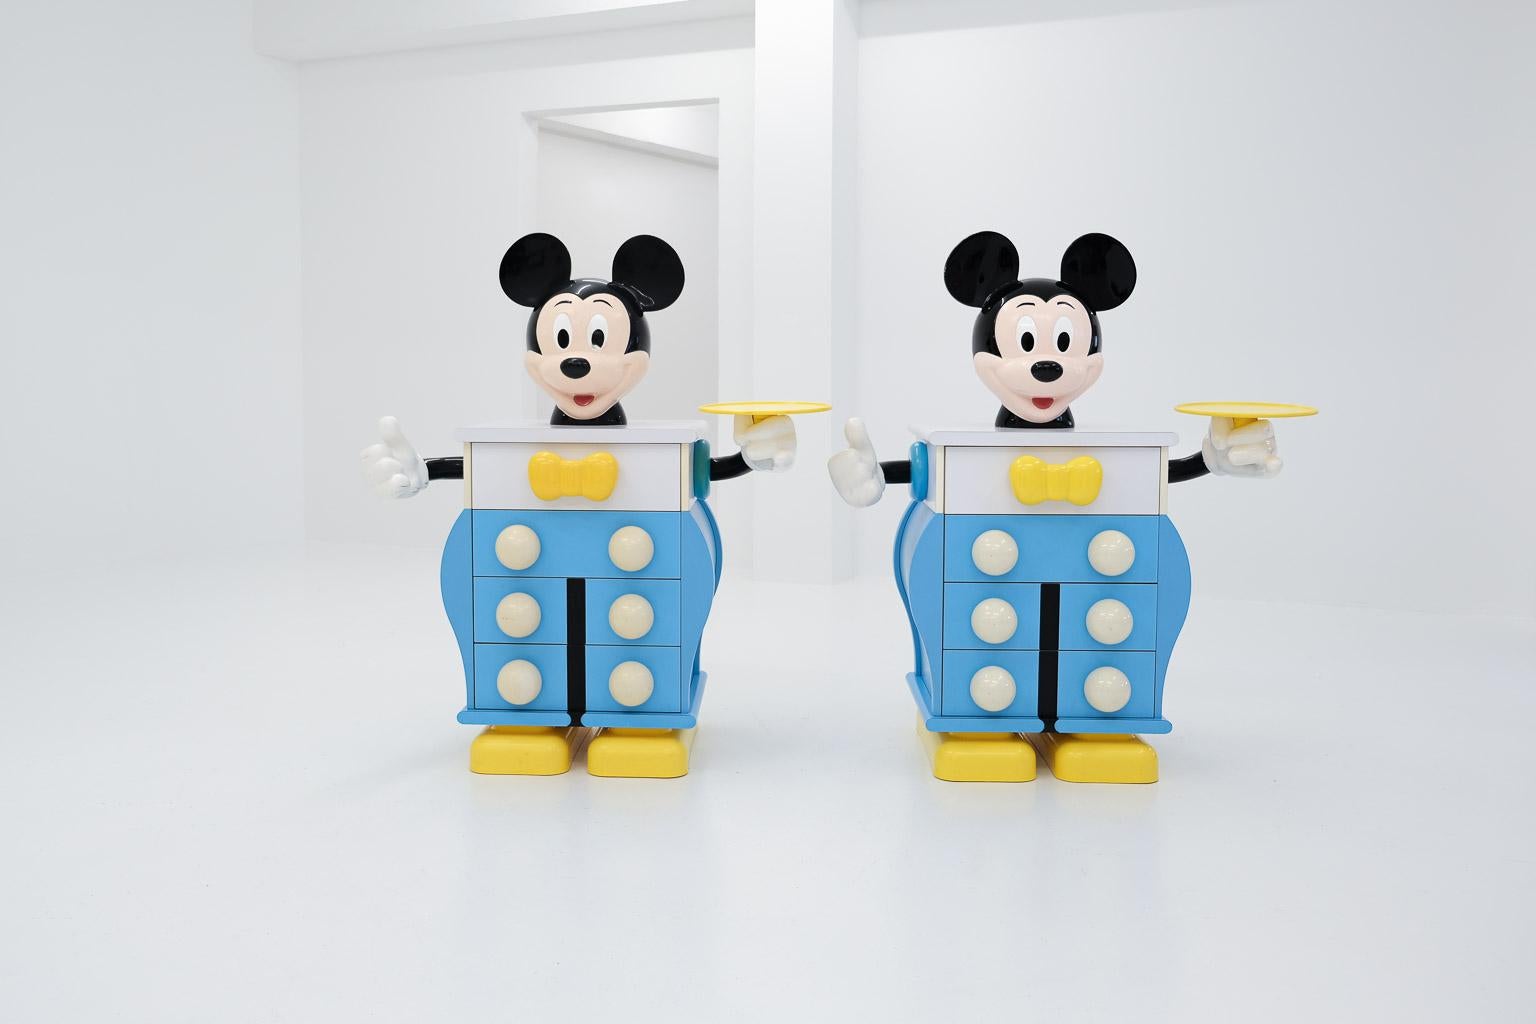 „oh, how cute!“ – if you’re a disney fan, these objects may make your heart beat faster. but they are more than just early disney licensed products: they are rare pieces of postmodern design history. designer pierre colleu, born in 1948, studied